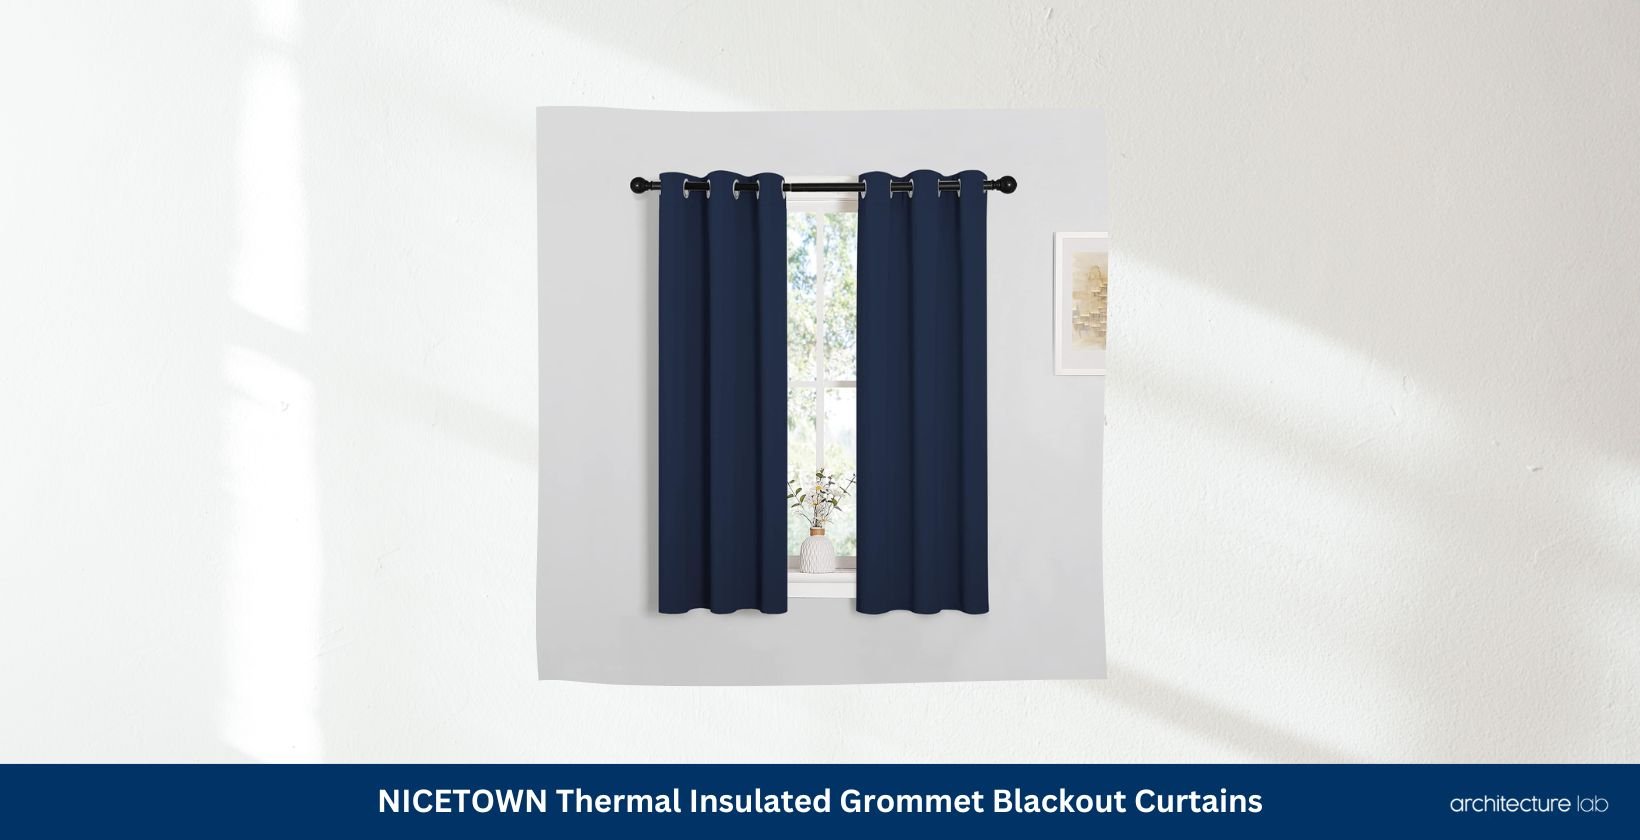 Nicetown thermal insulated grommet blackout curtains